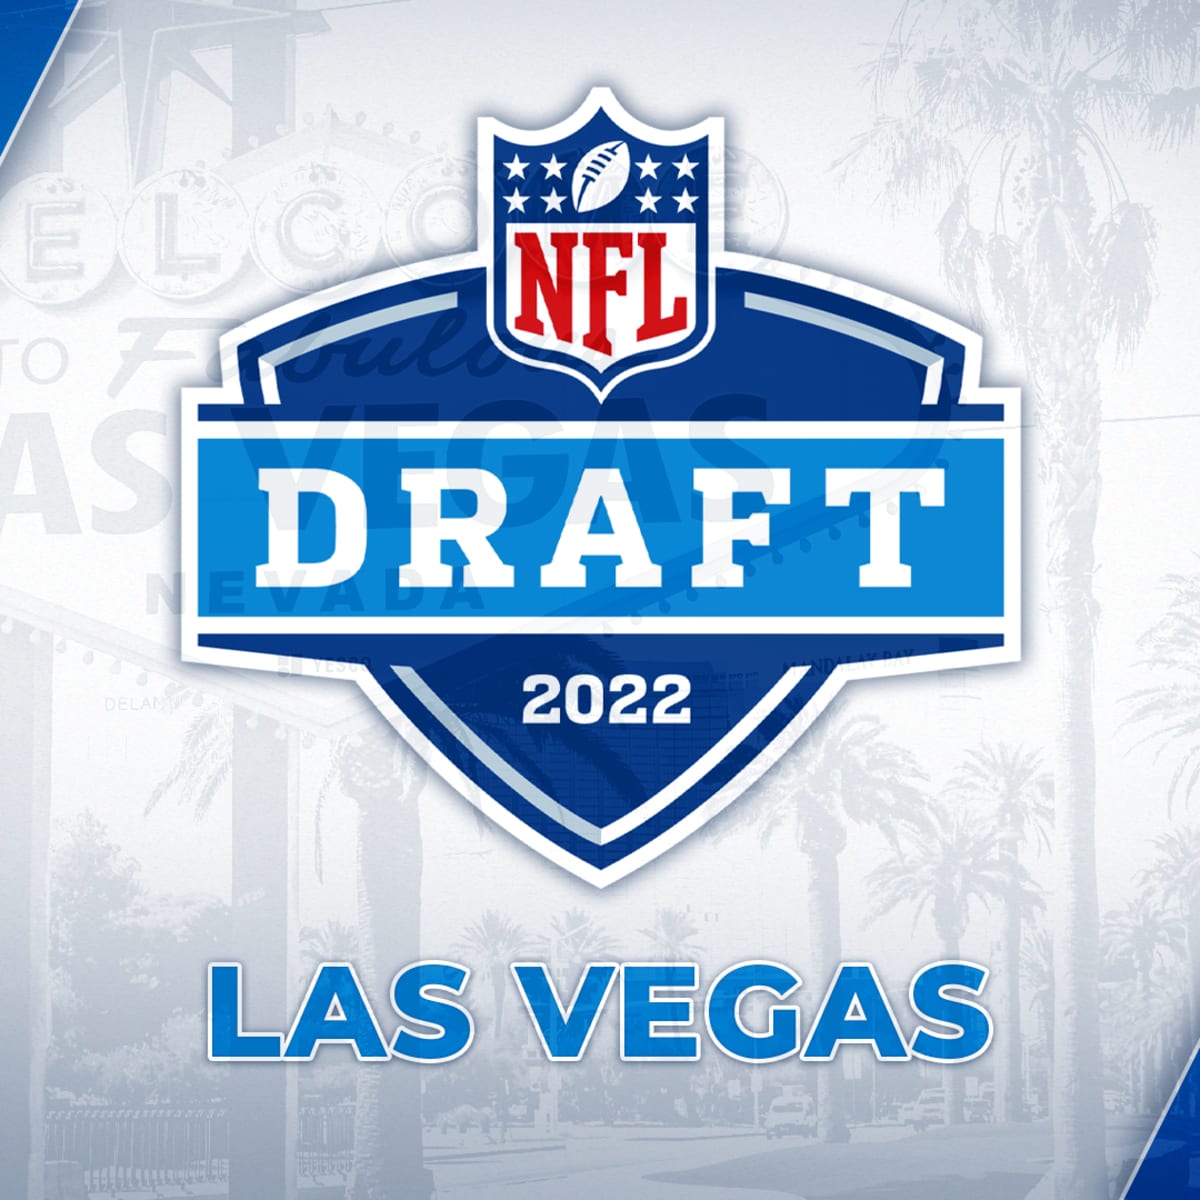 NFL Draft: Full 2022 NFL Draft Order - Visit NFL Draft on Sports  Illustrated, the latest news coverage, with rankings for NFL Draft  prospects, College Football, Dynasty and Devy Fantasy Football.